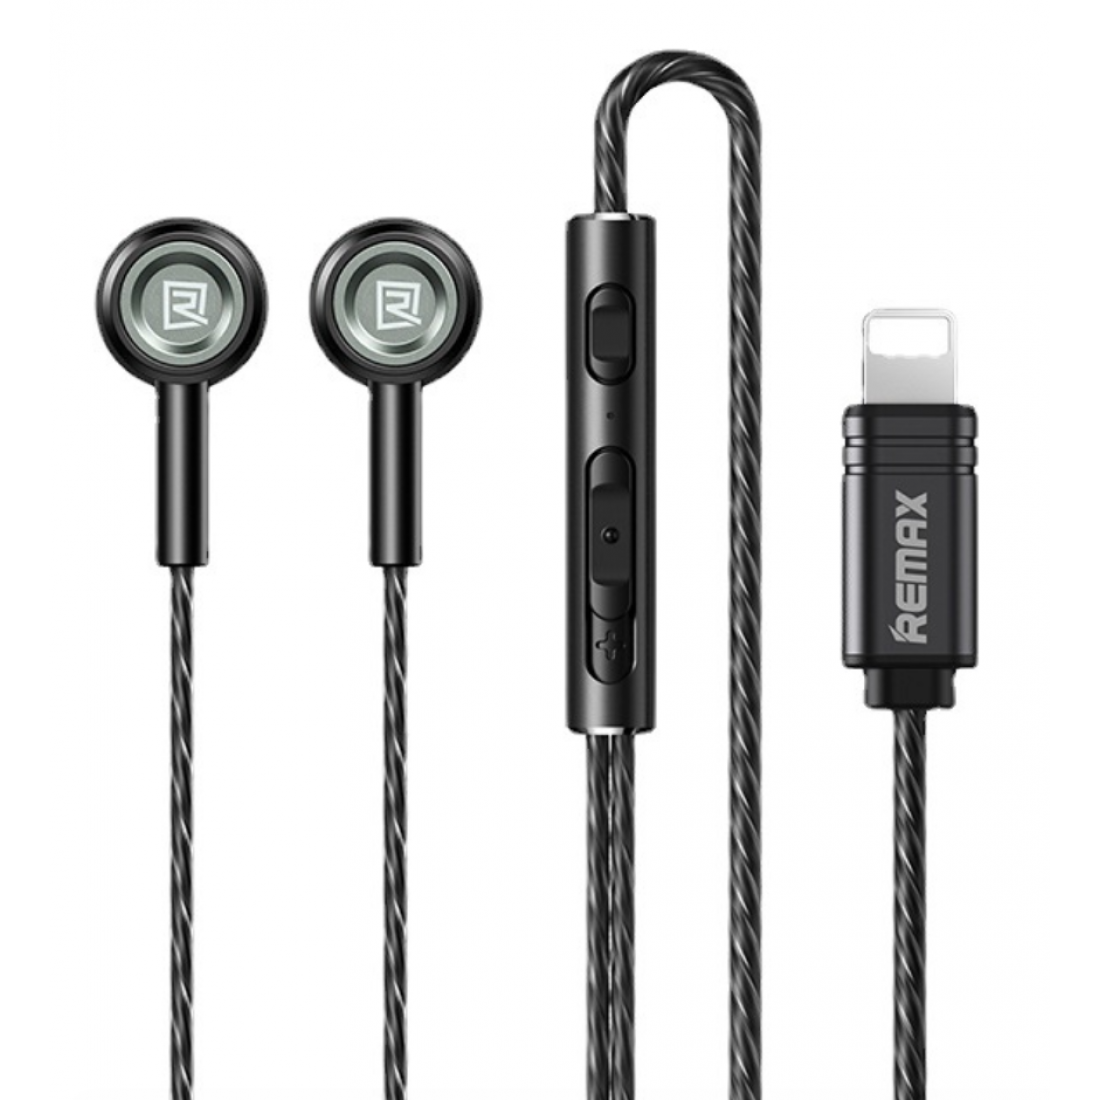 Remax RM 202 Wired Earphone